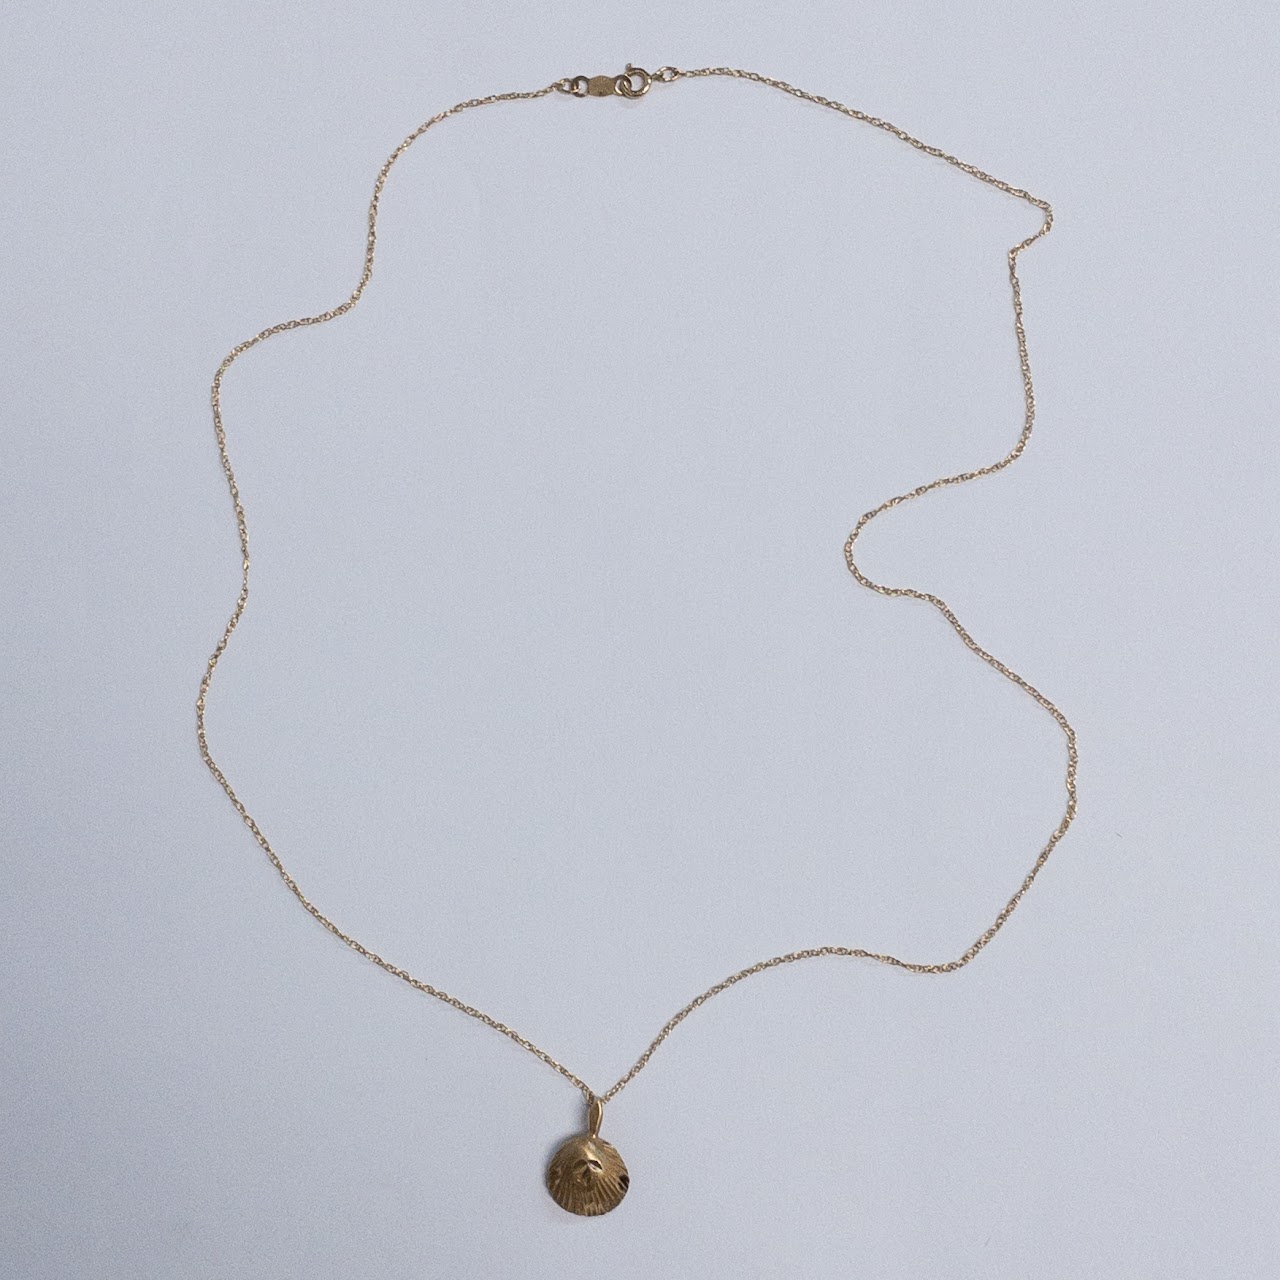 14K Gold Shell Pendant Necklace